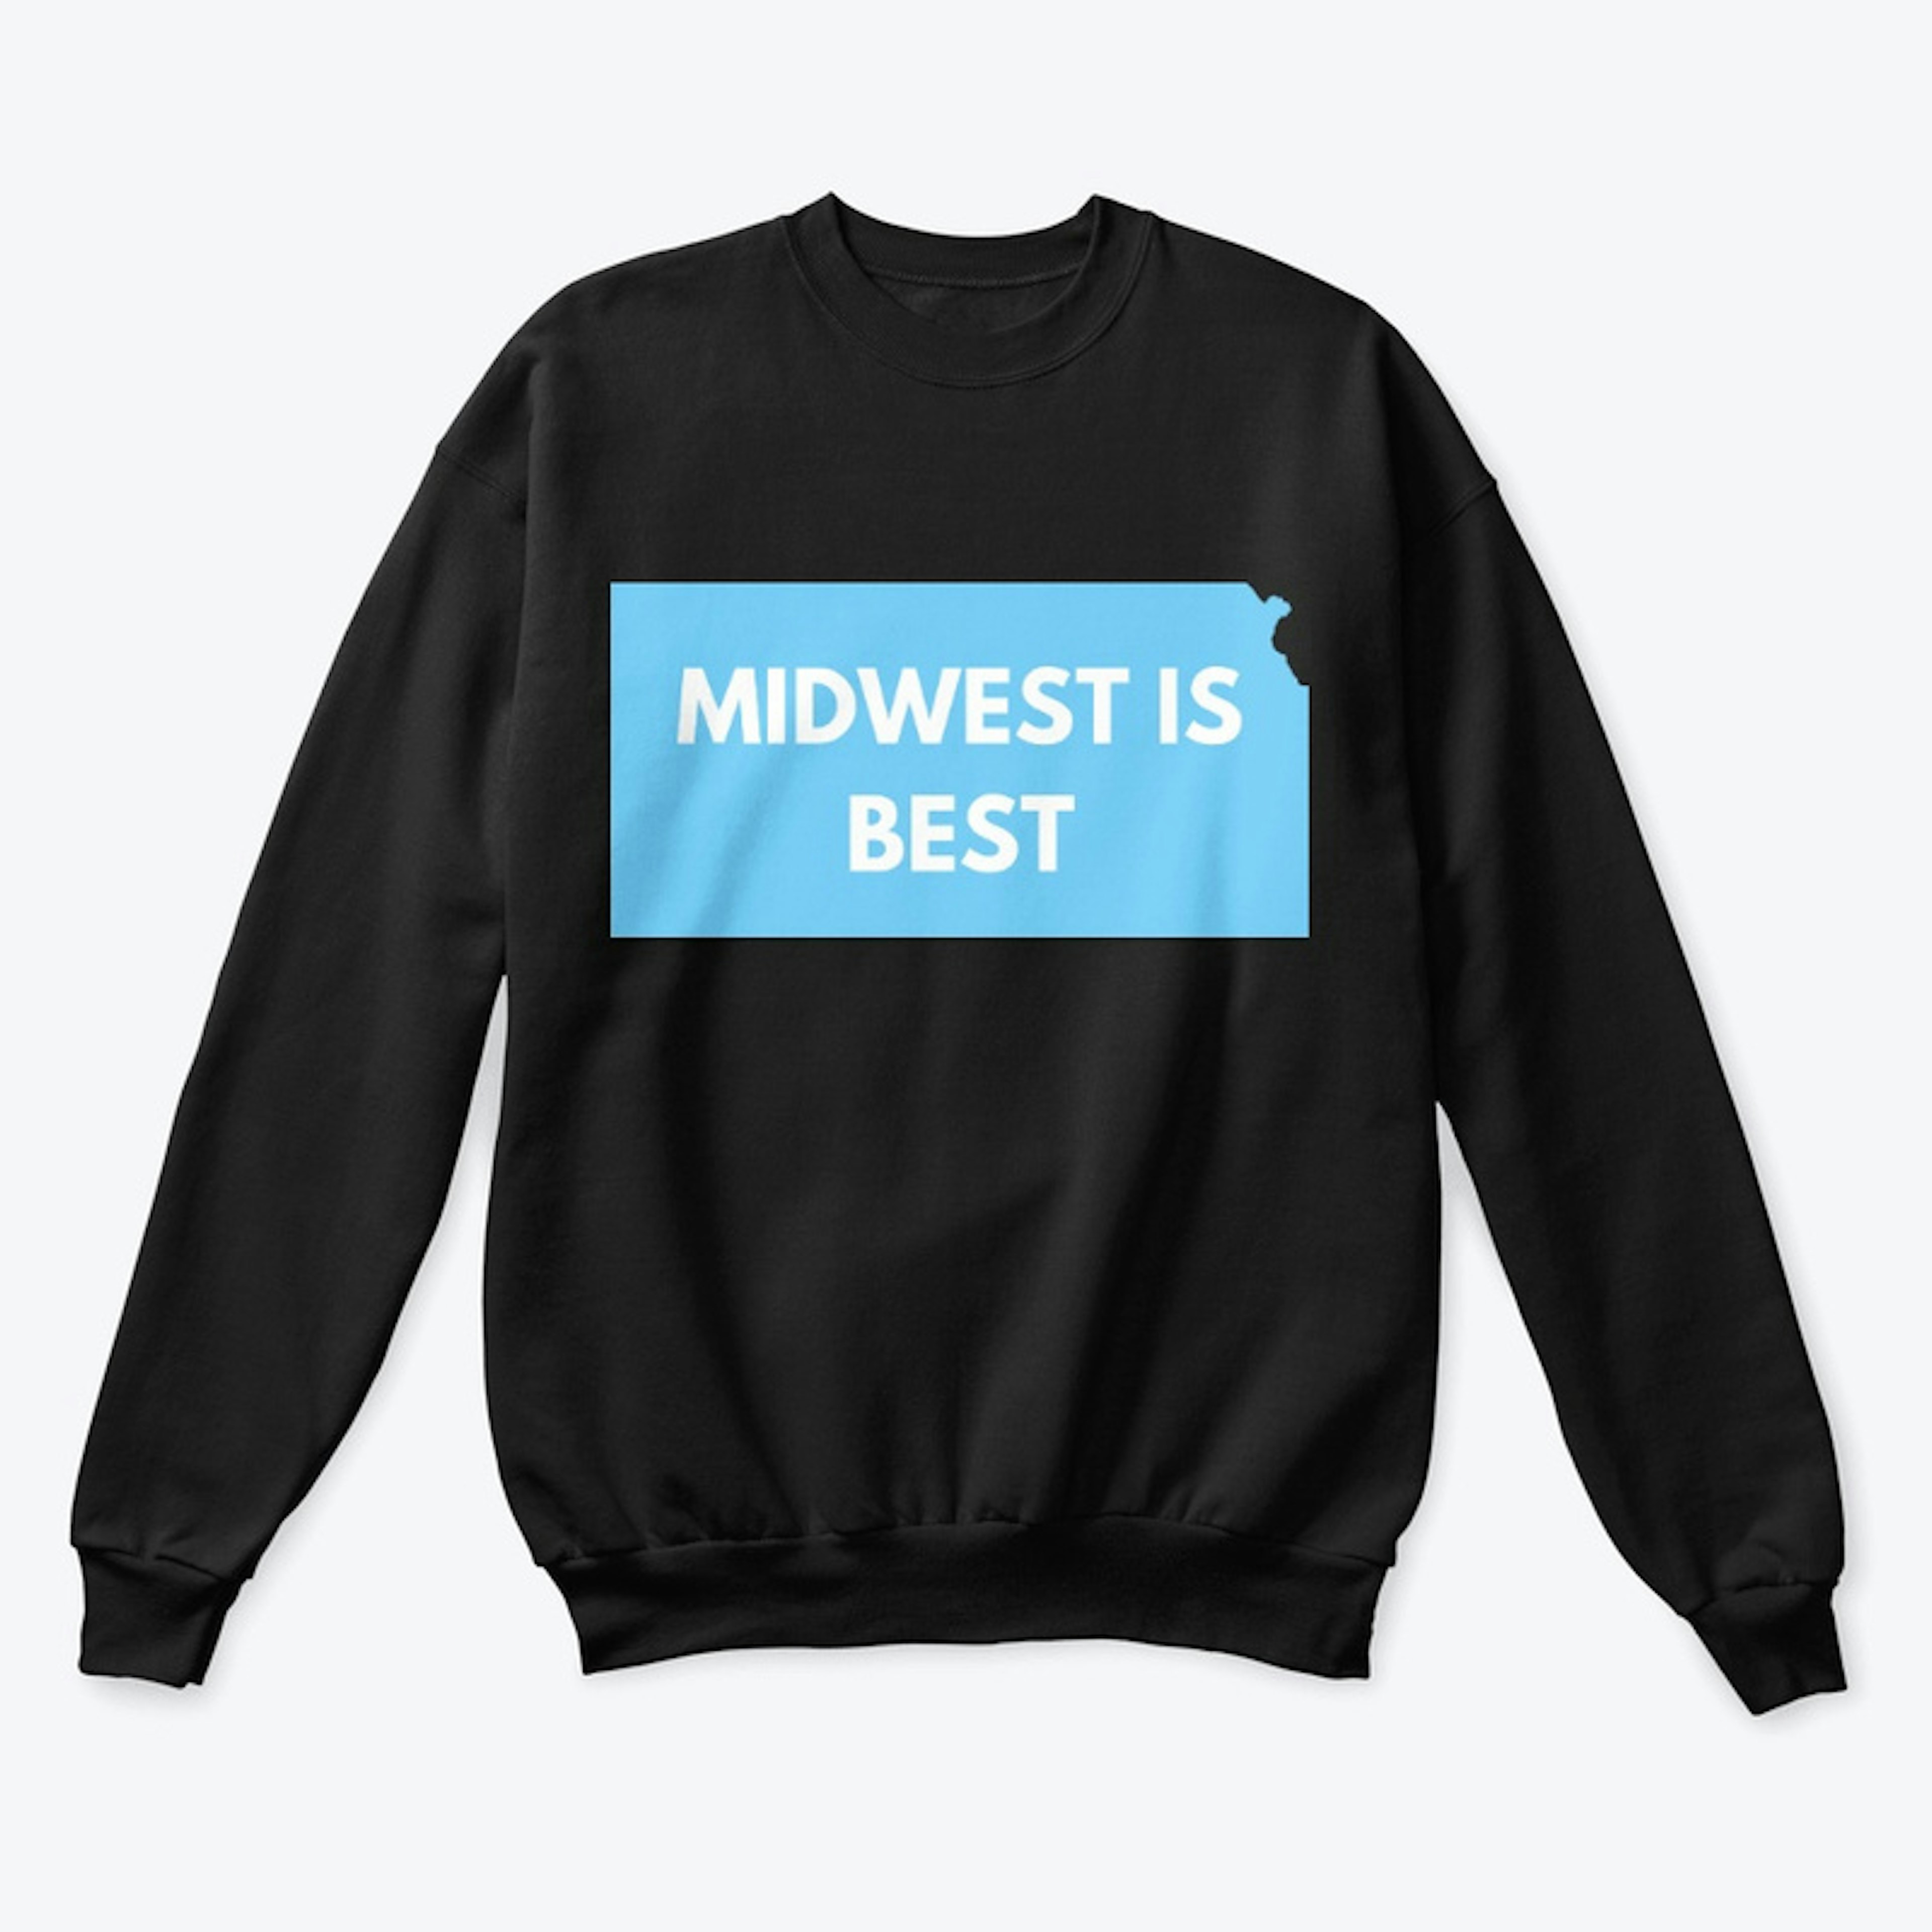 Midwest is Best!